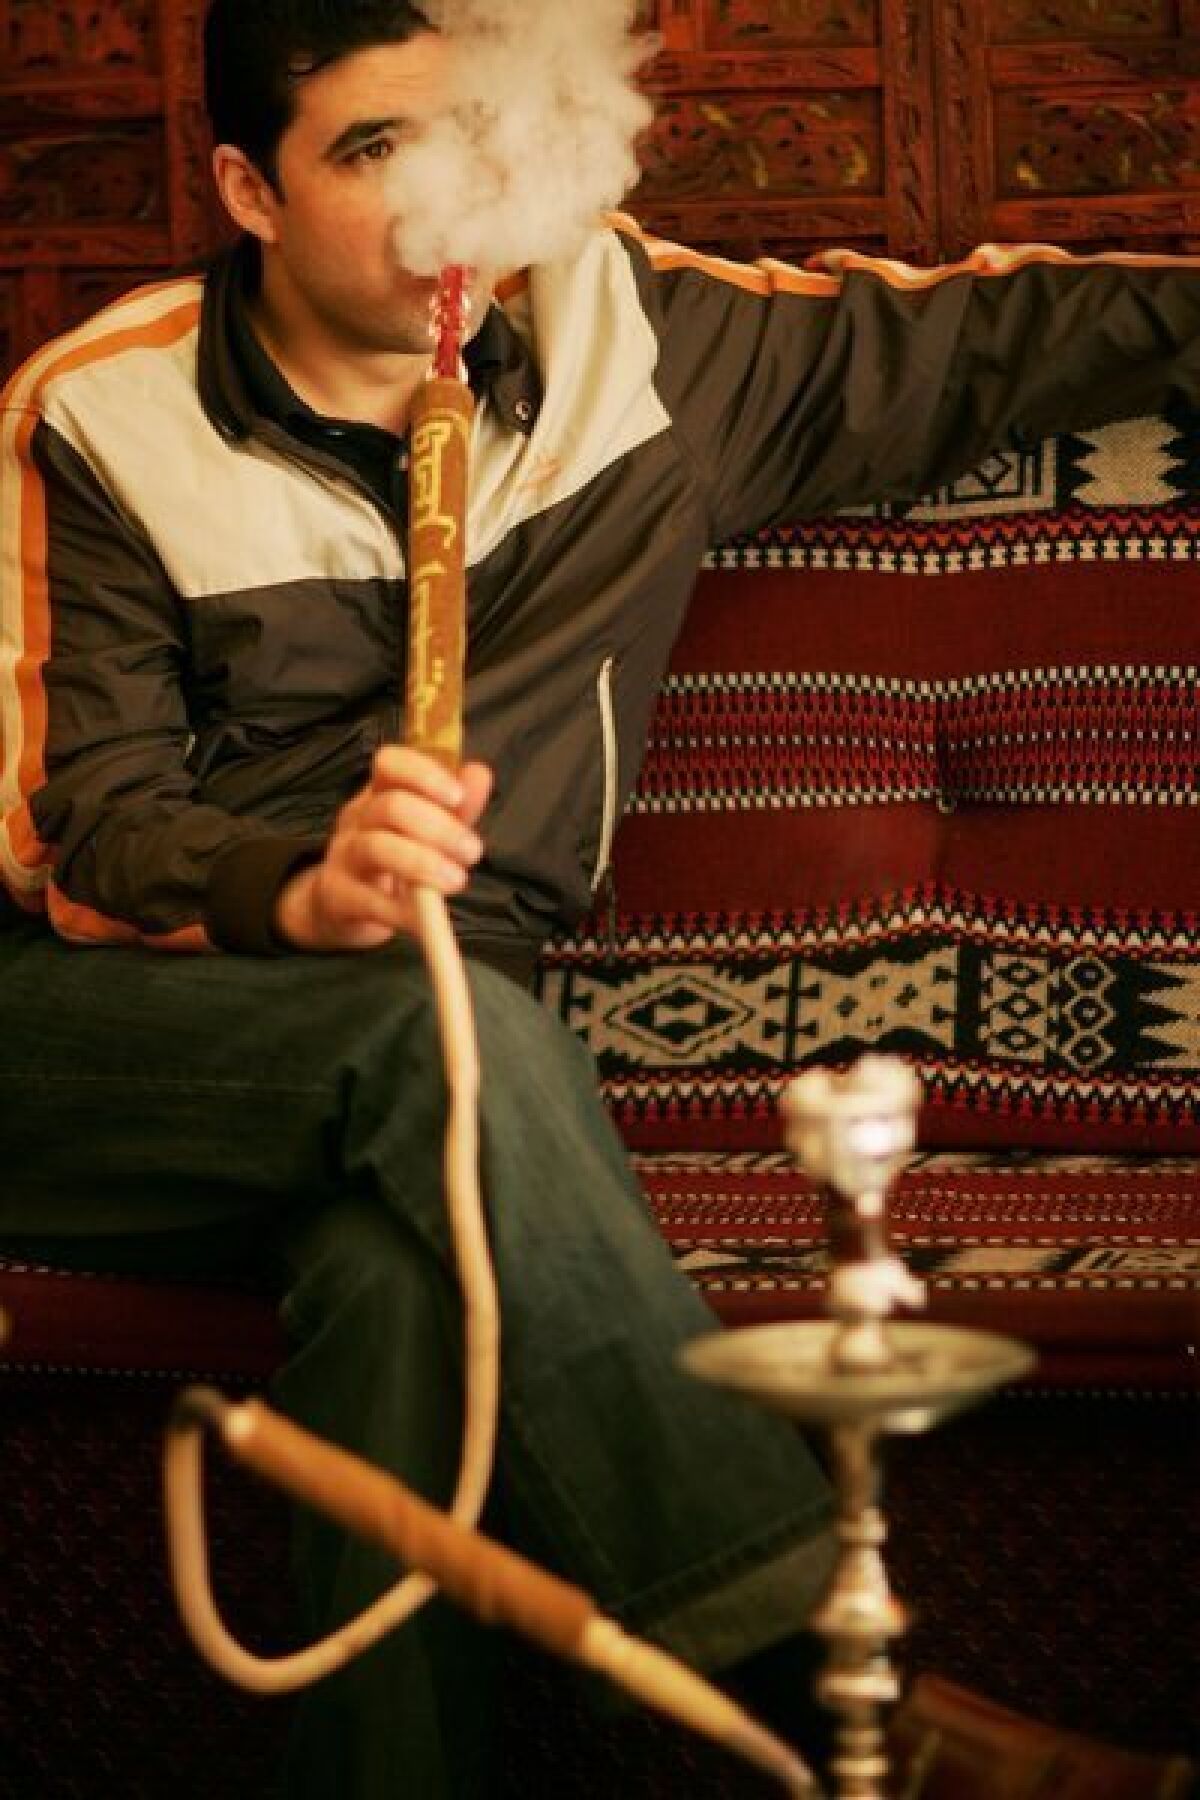 Public health experts say in a new report that more must be done to curb teenage hookah smoking.